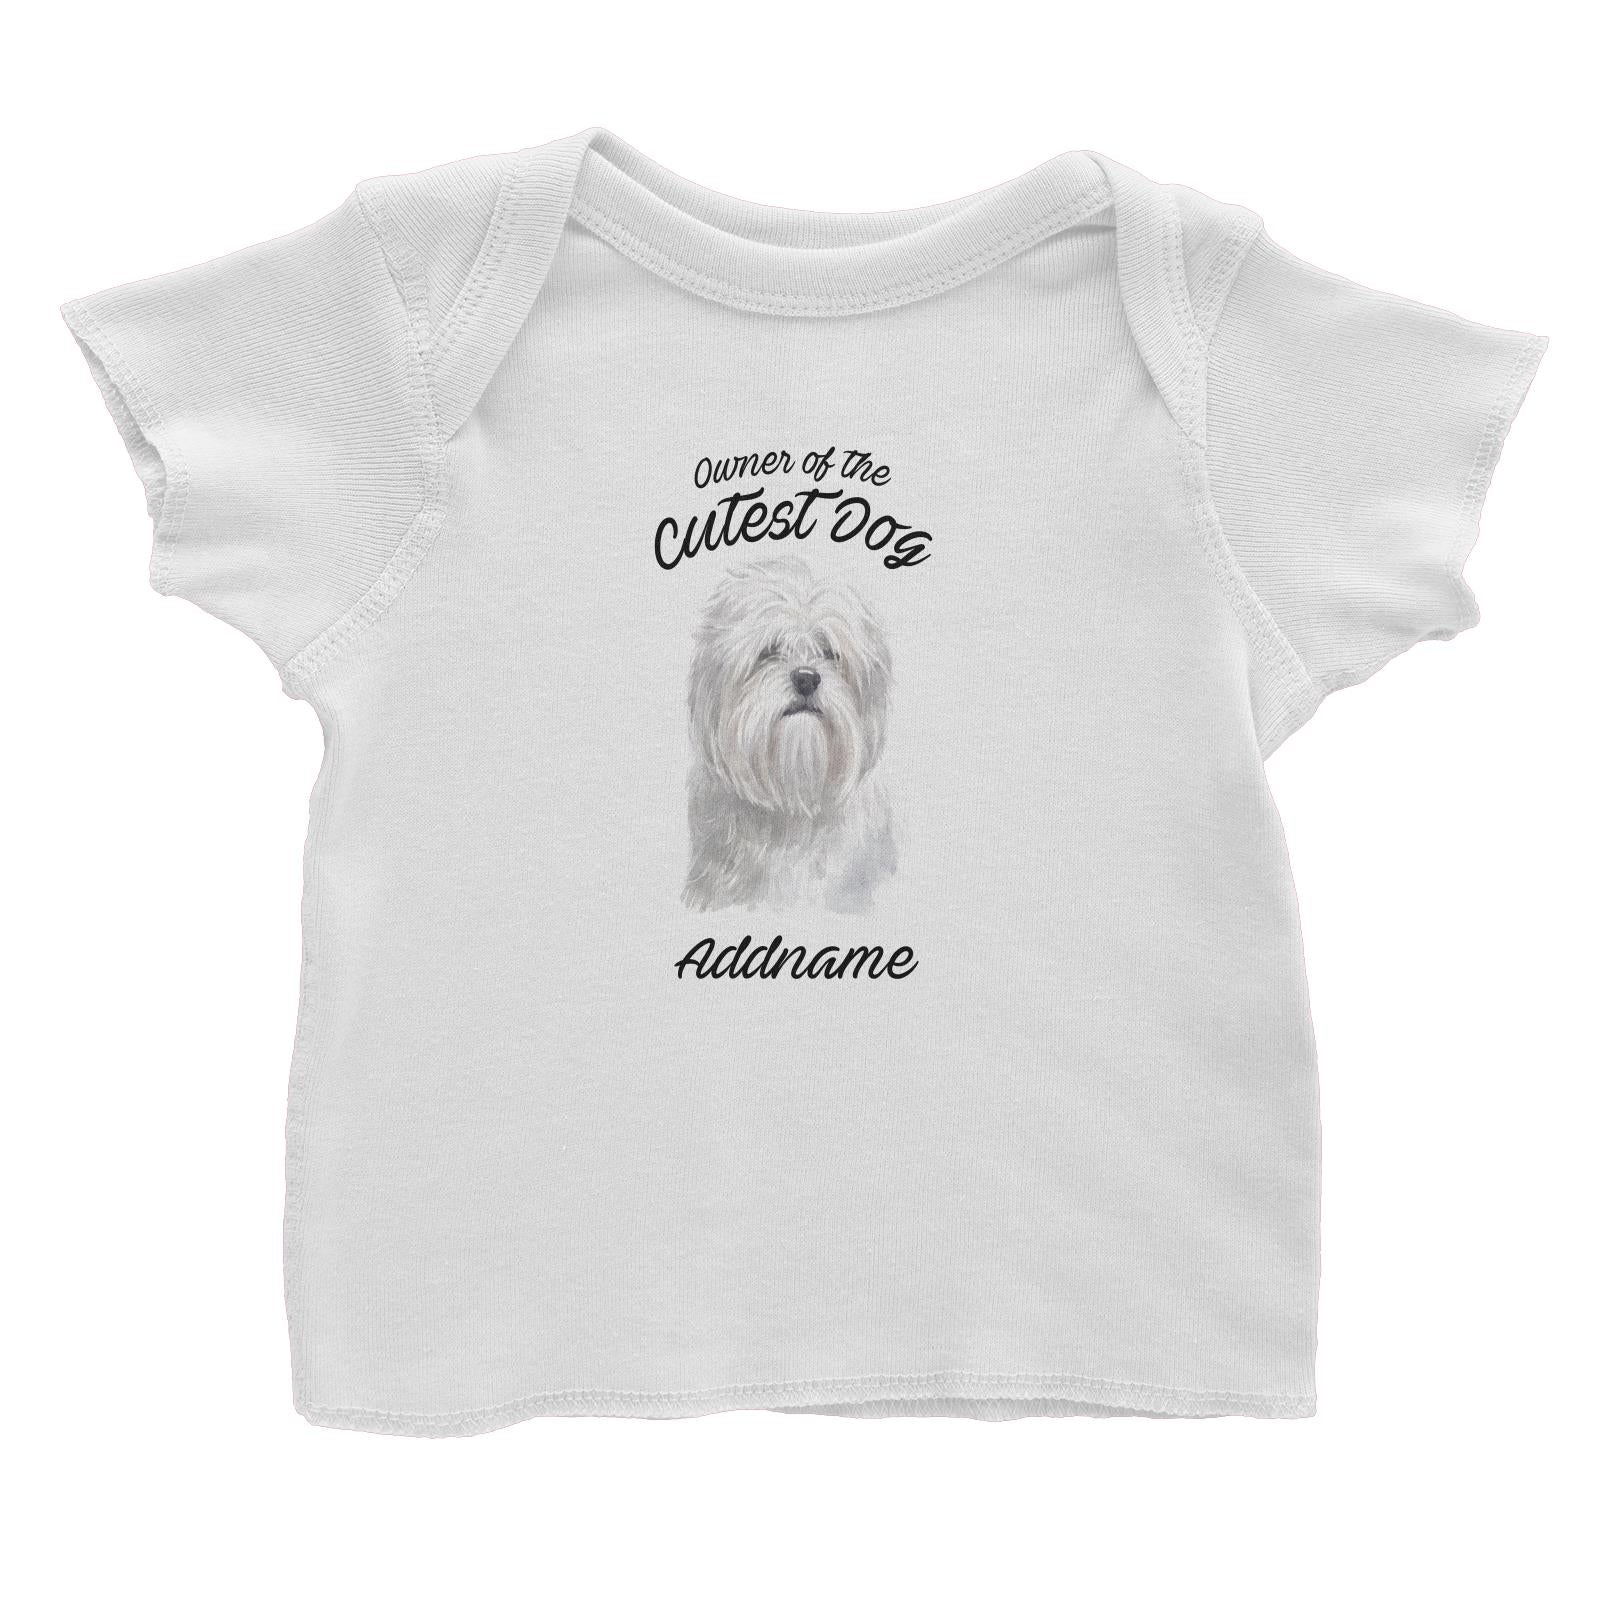 Watercolor Dog Owner Of The Cutest Dog Lhasa Apso Addname Baby T-Shirt